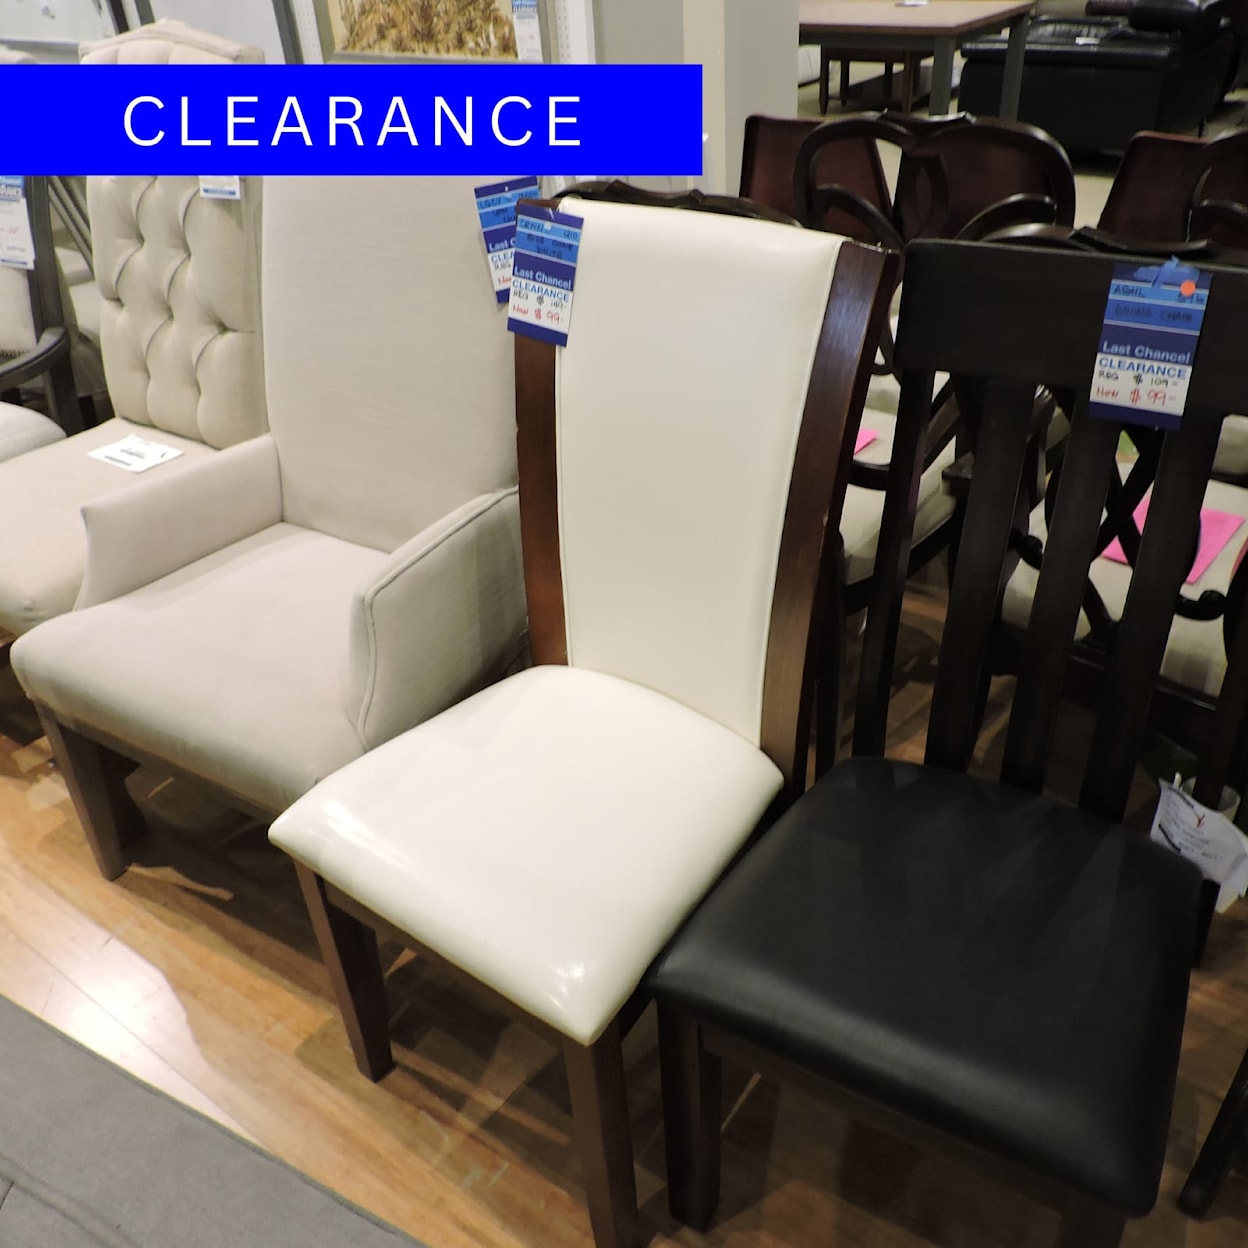 Miscellaneous Clearance Dining Chair